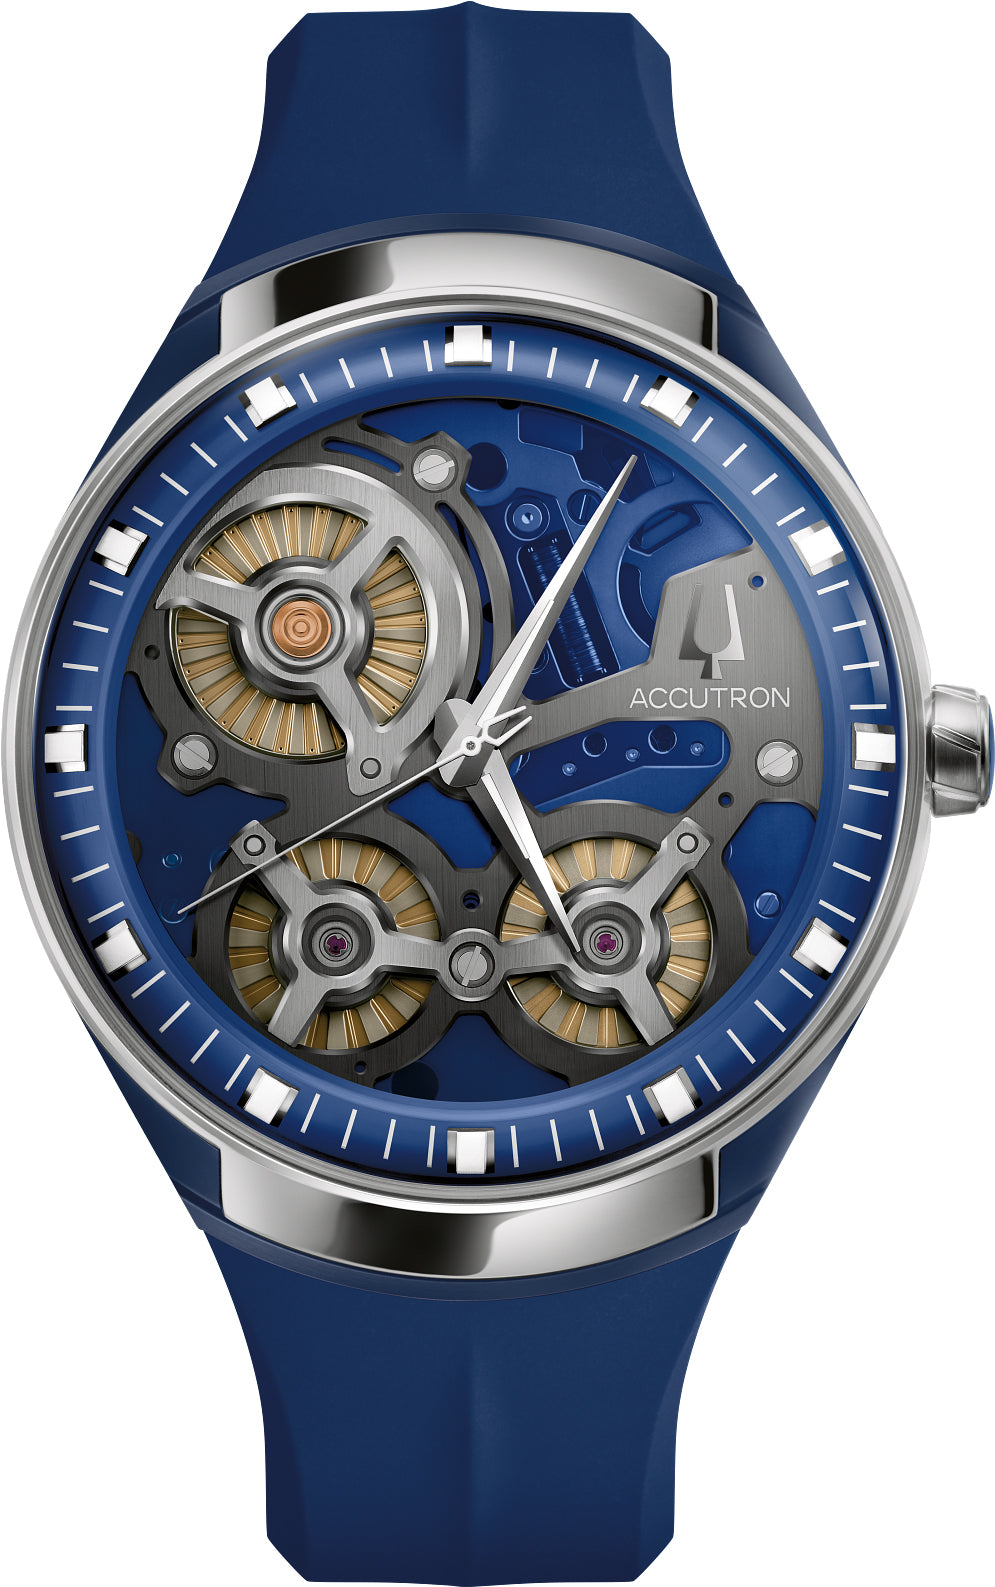 Accutron Watch DNA Casino Blue Limited Edition